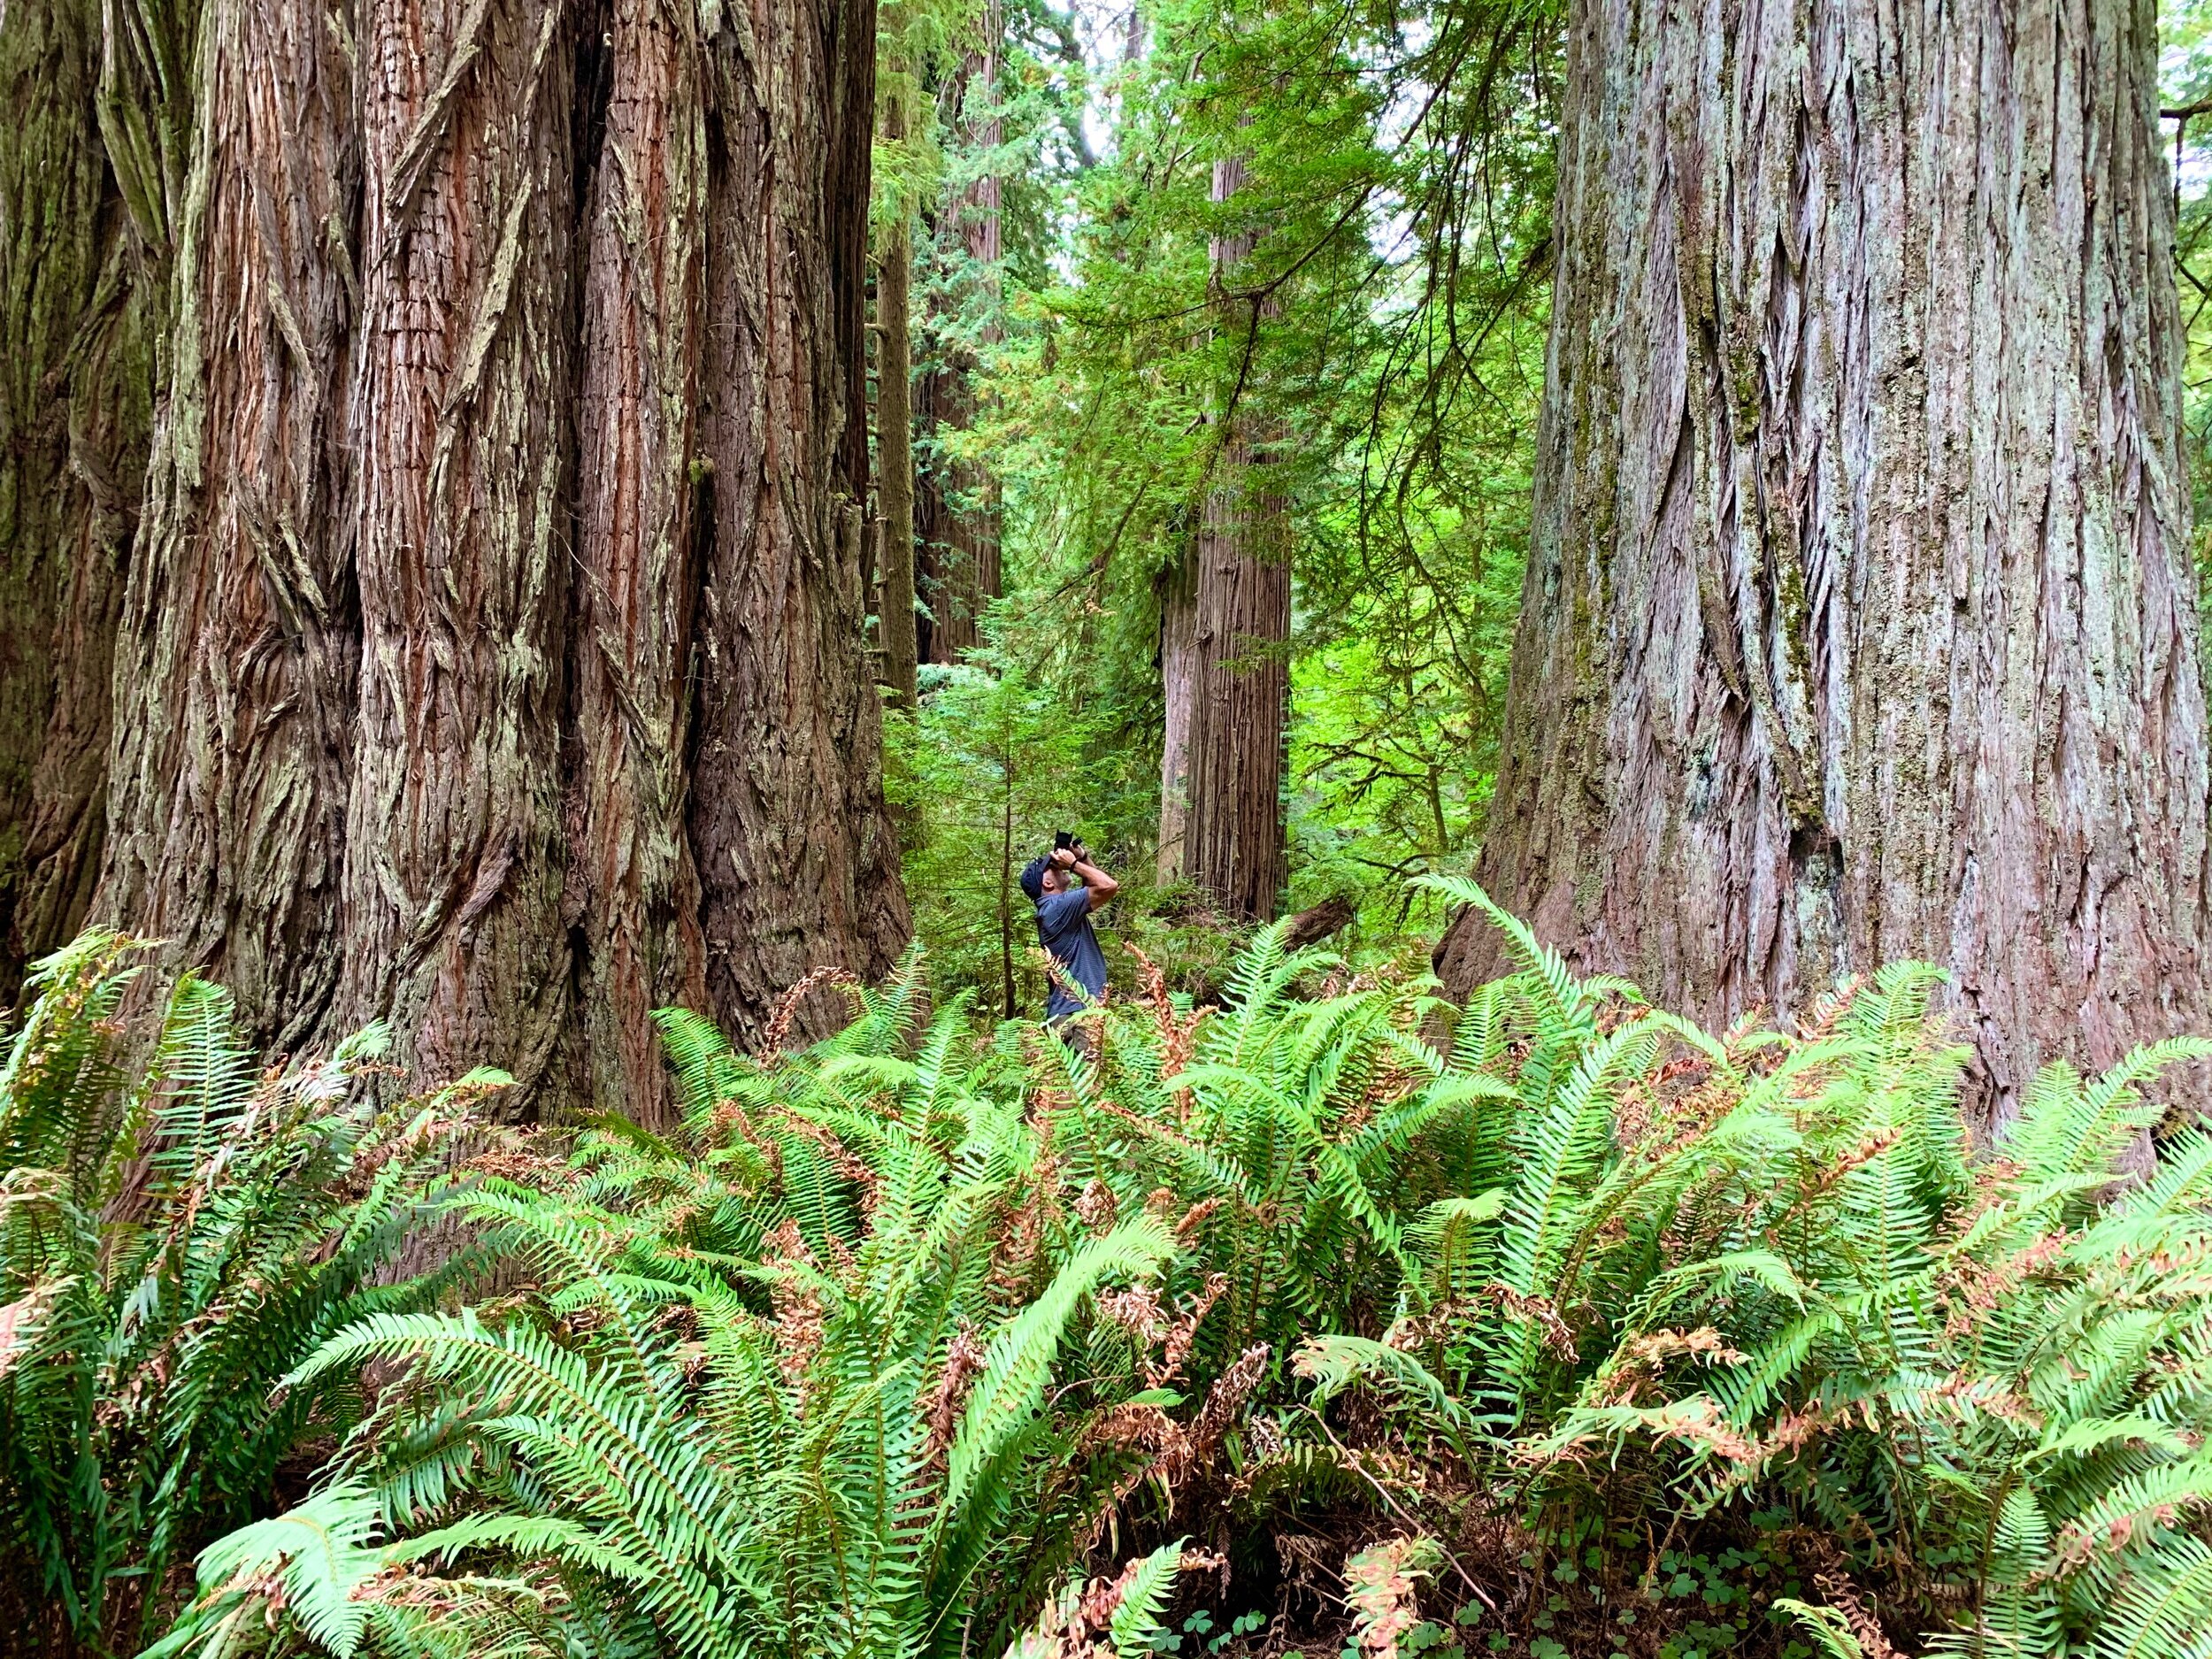  There are many trails in the Redwood Forest, and they all contain these spectacular giants. As I took this photo, Craig thought he heard a voice coming from above and softly whispering,  "Helloooo."  He ignored the voice but then heard it again:  "H